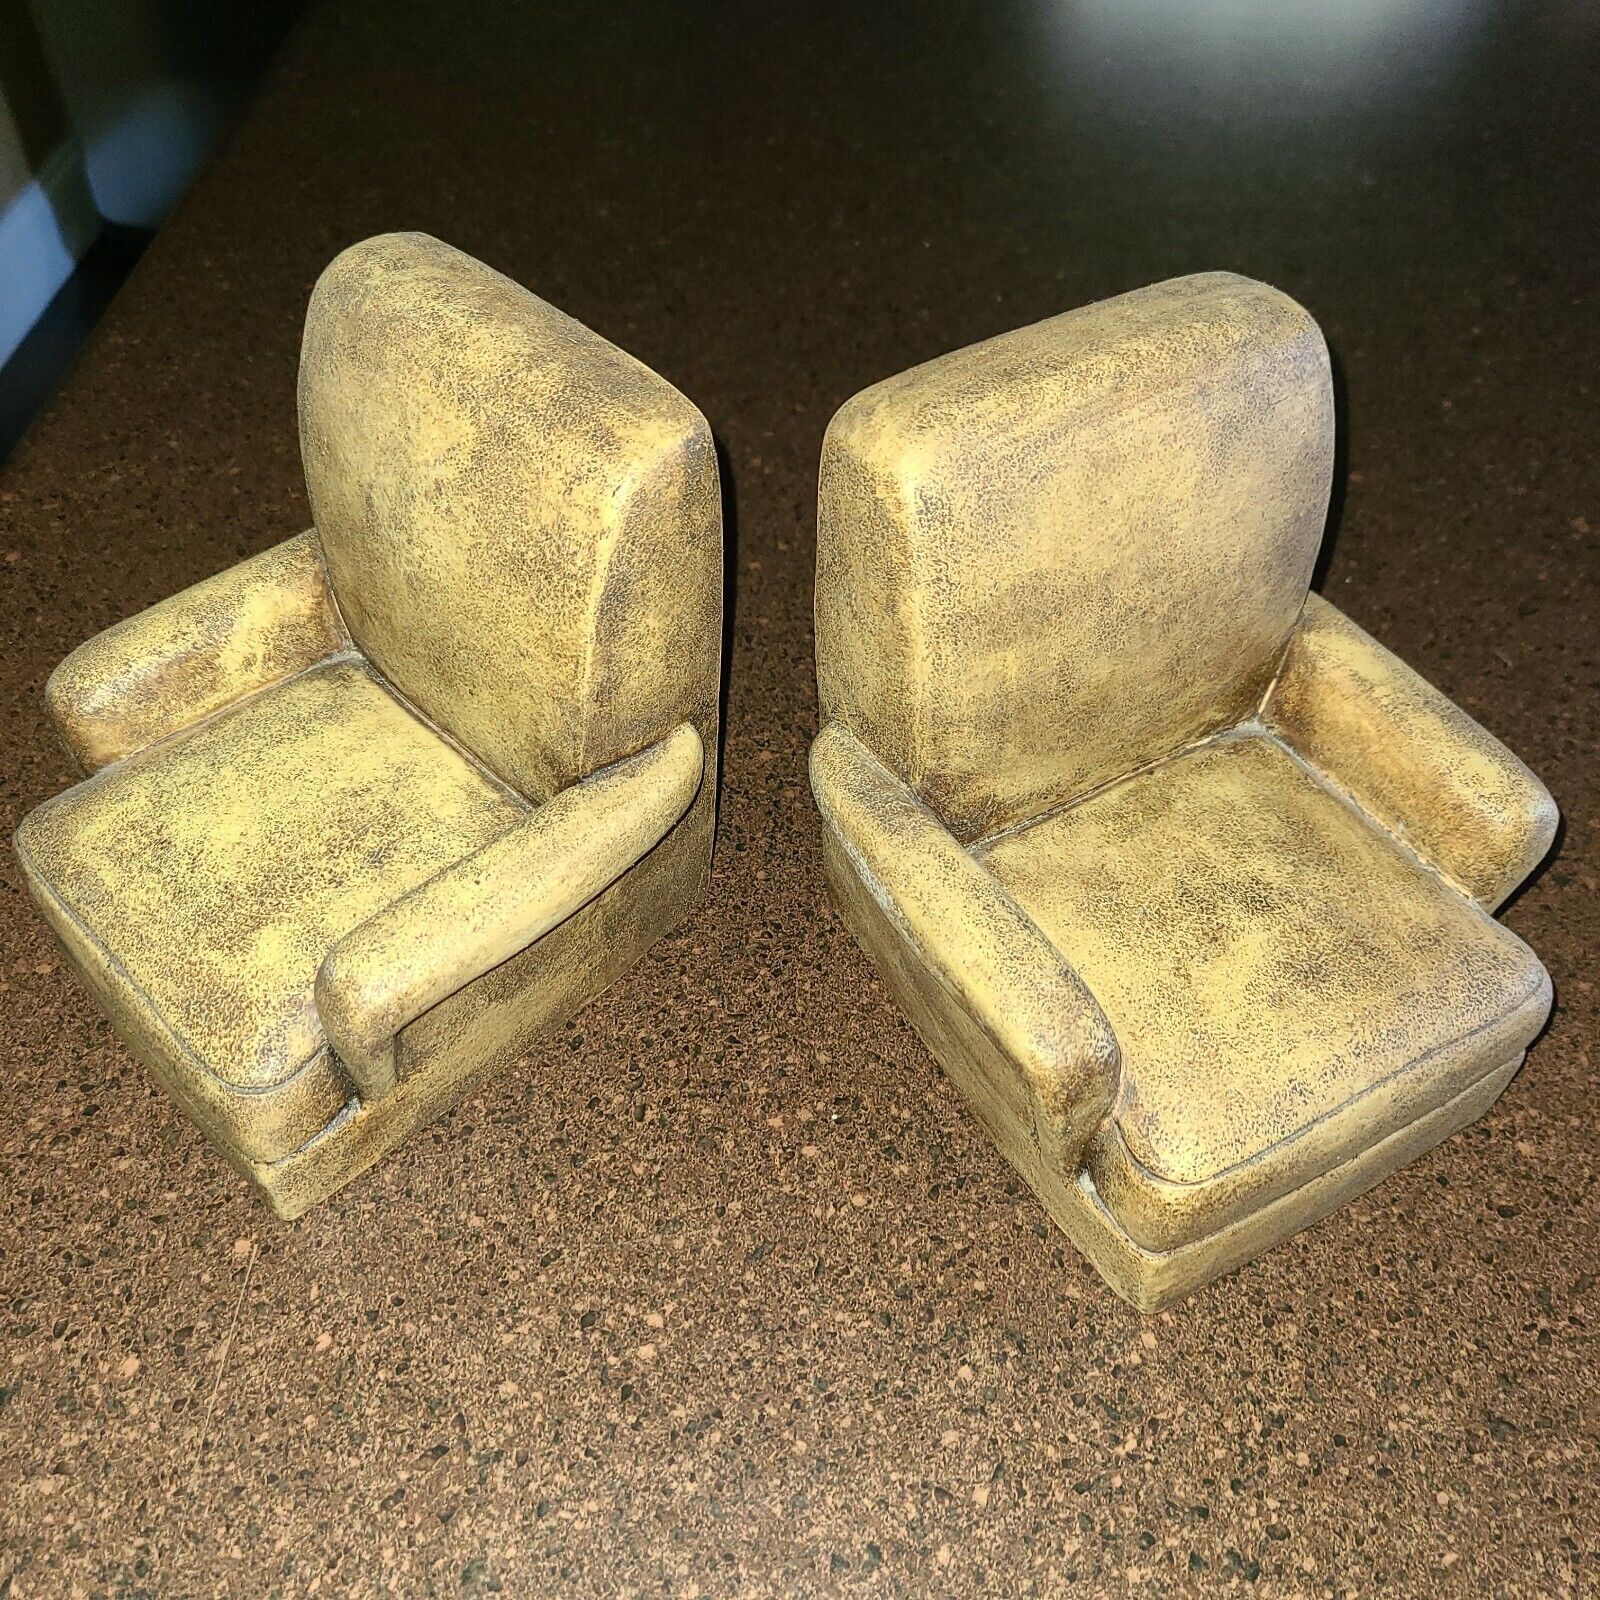 Pair of resin armchair bookends novelty library books home decor